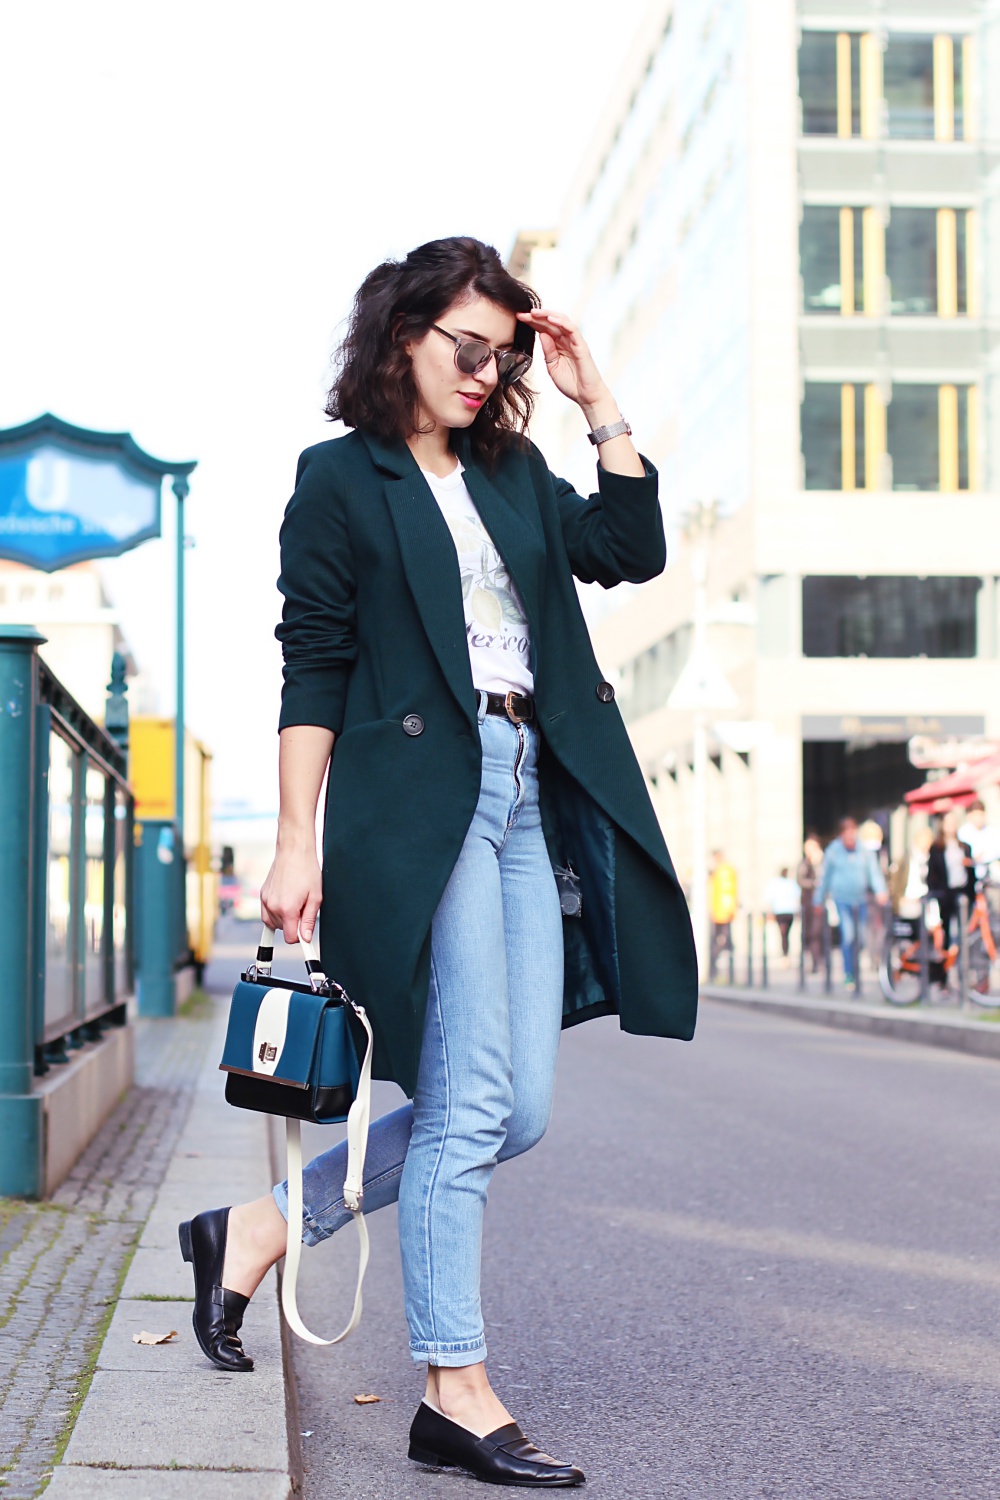 green coat fall outfit autumn look streetstyle street style berlin blog city modern color trend 2017 fashion oasis topshop peter kaiser designer bag shoes